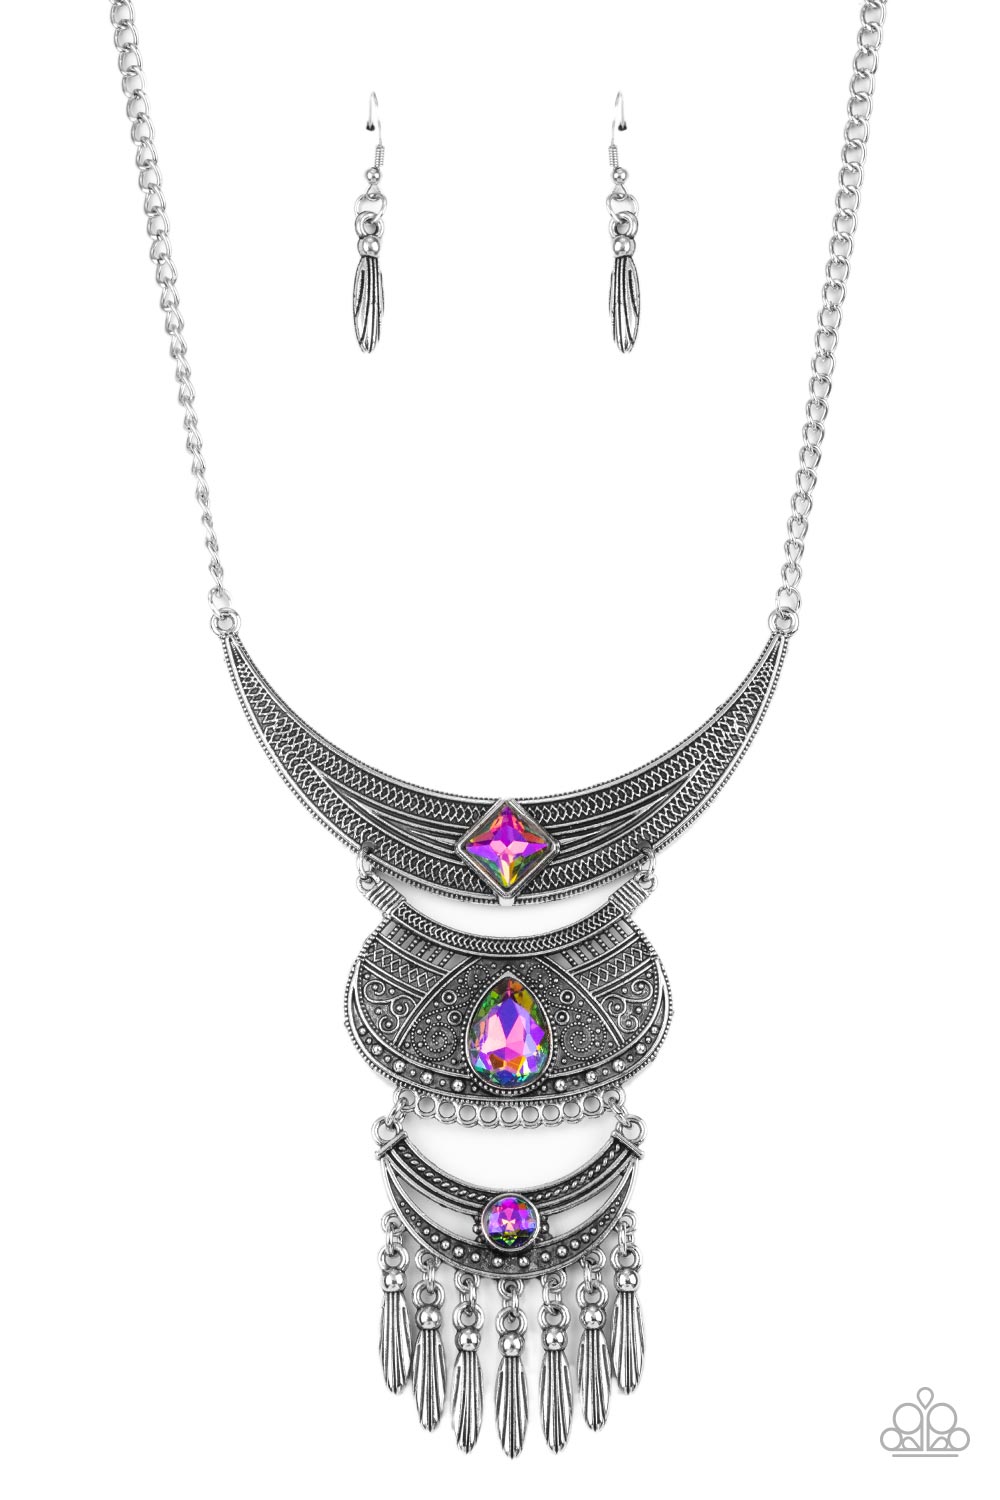 Lunar Enchantment - Multi Iridescent Necklaces embossed in studded, geometric, and paisley filigree-like patterns, three mismatched silver half moon plates dramatically link below the collar. Featuring an iridescent UV shimmer, an oversized collection of square, teardrop, and round rhinestones embellish the decorative silver frames, while a silver beaded fringe swings from the lowermost plate for a noisemaking finish. Features an adjustable clasp closure.